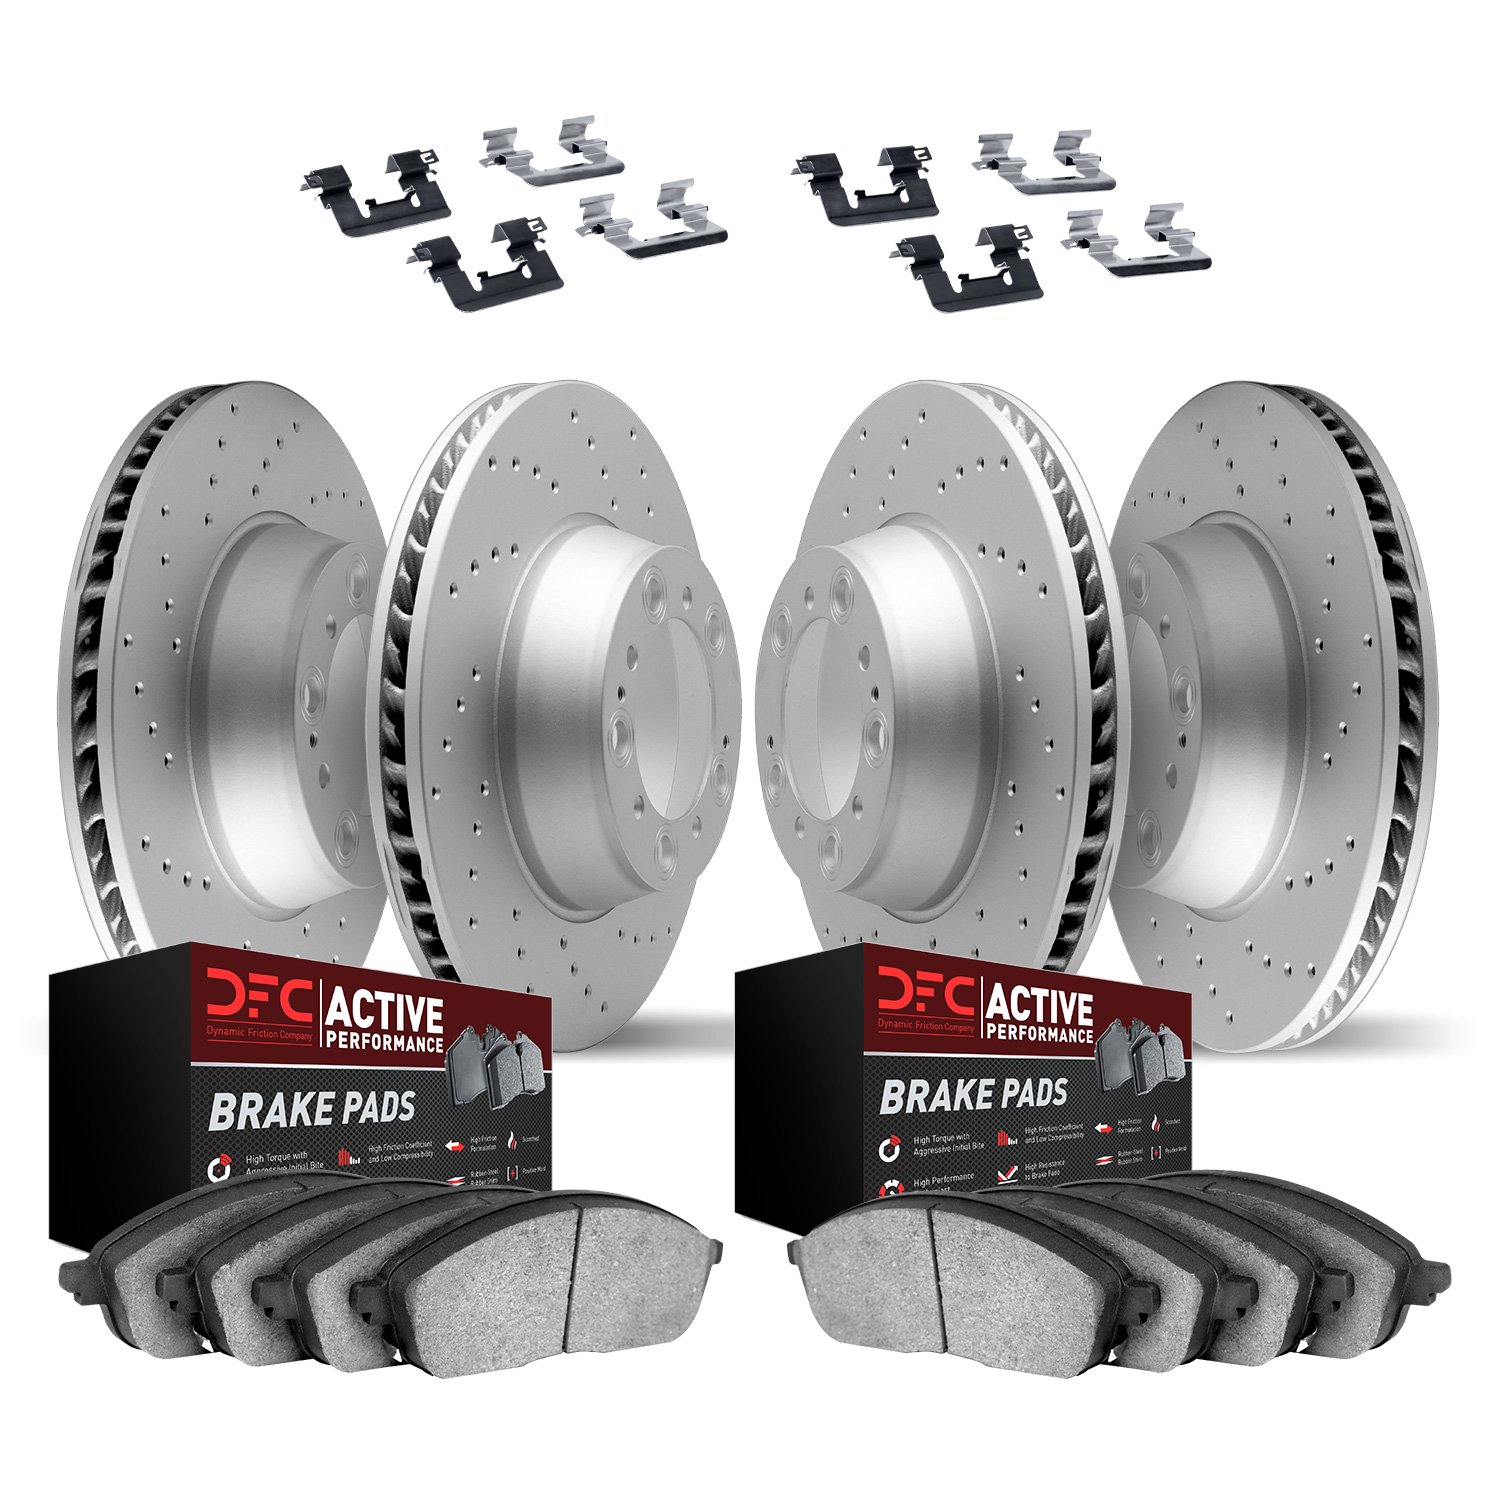 2714-31093 Geoperformance Drilled Brake Rotors with Active Performance Pads Kit & Hardware, 2007-2015 BMW, Position: Front and R